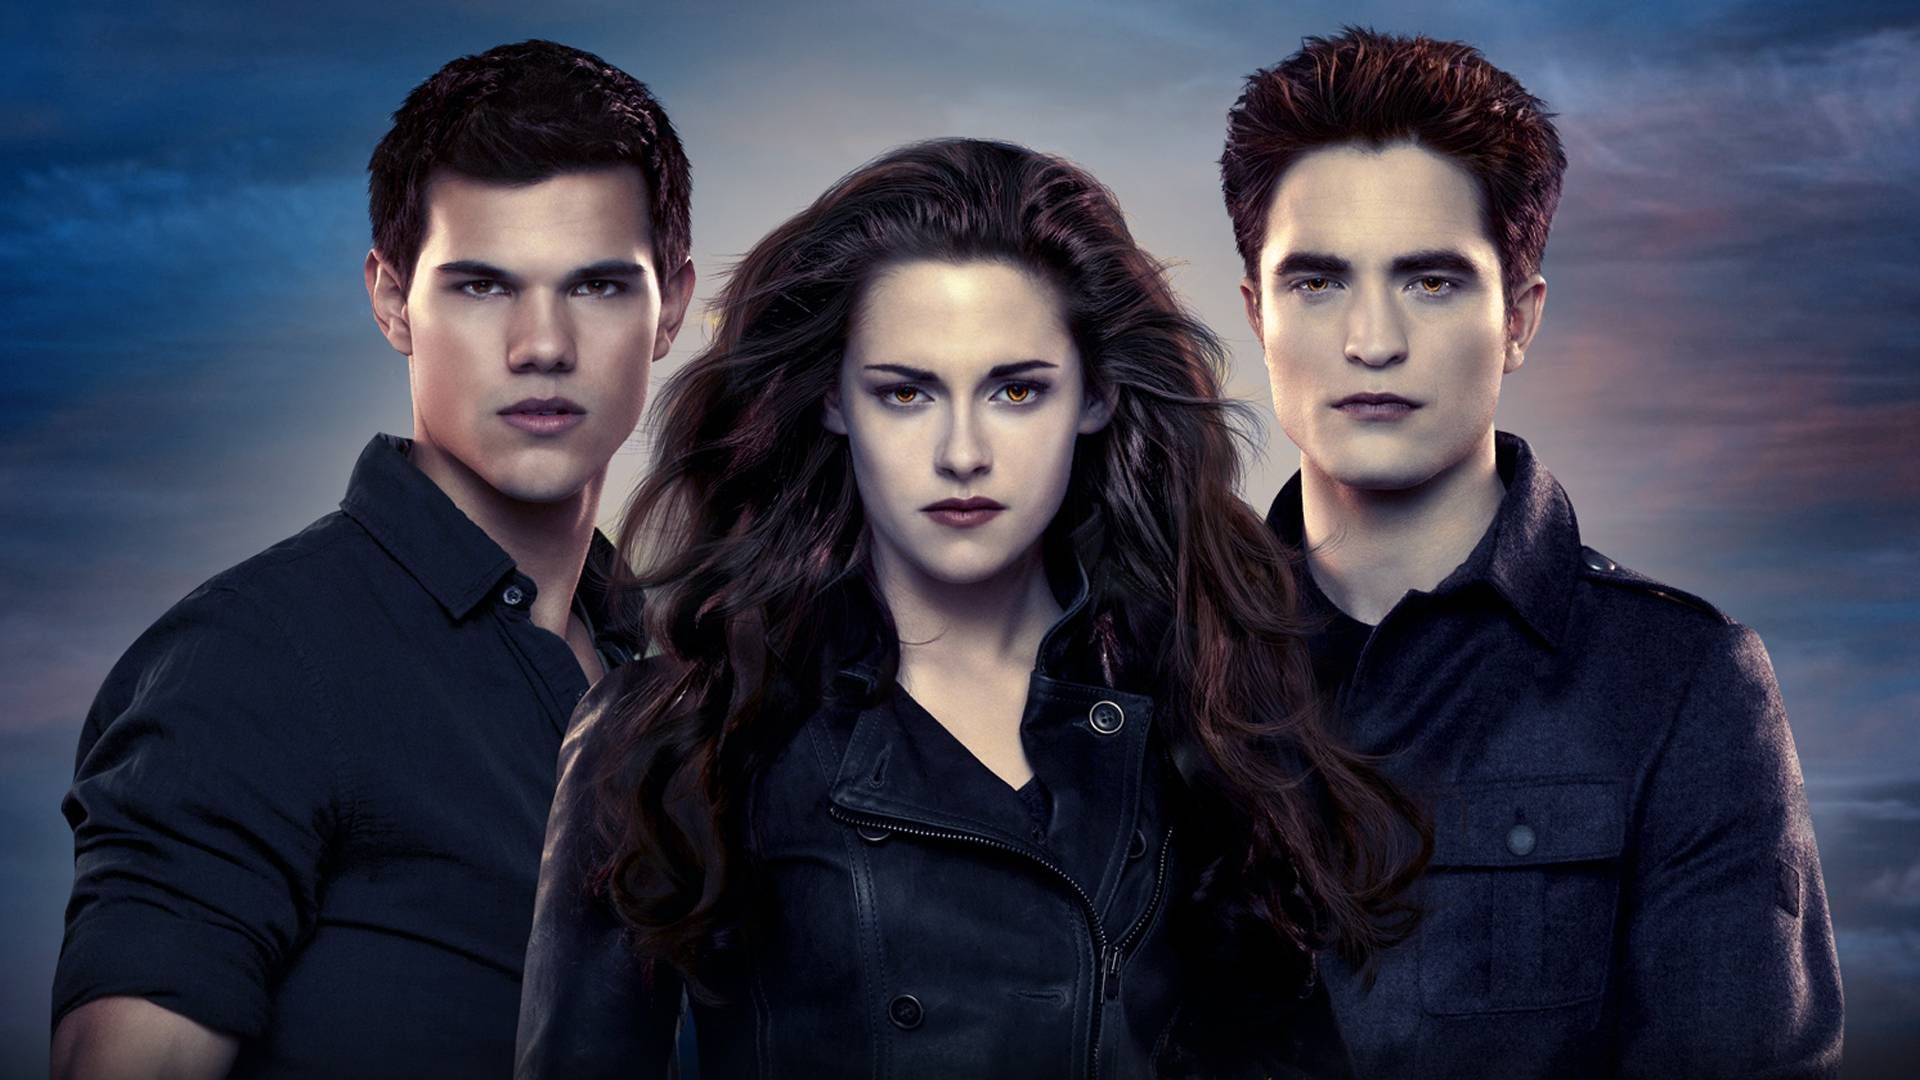 Jacob, Bella, and Edward in a promo image for Twilight